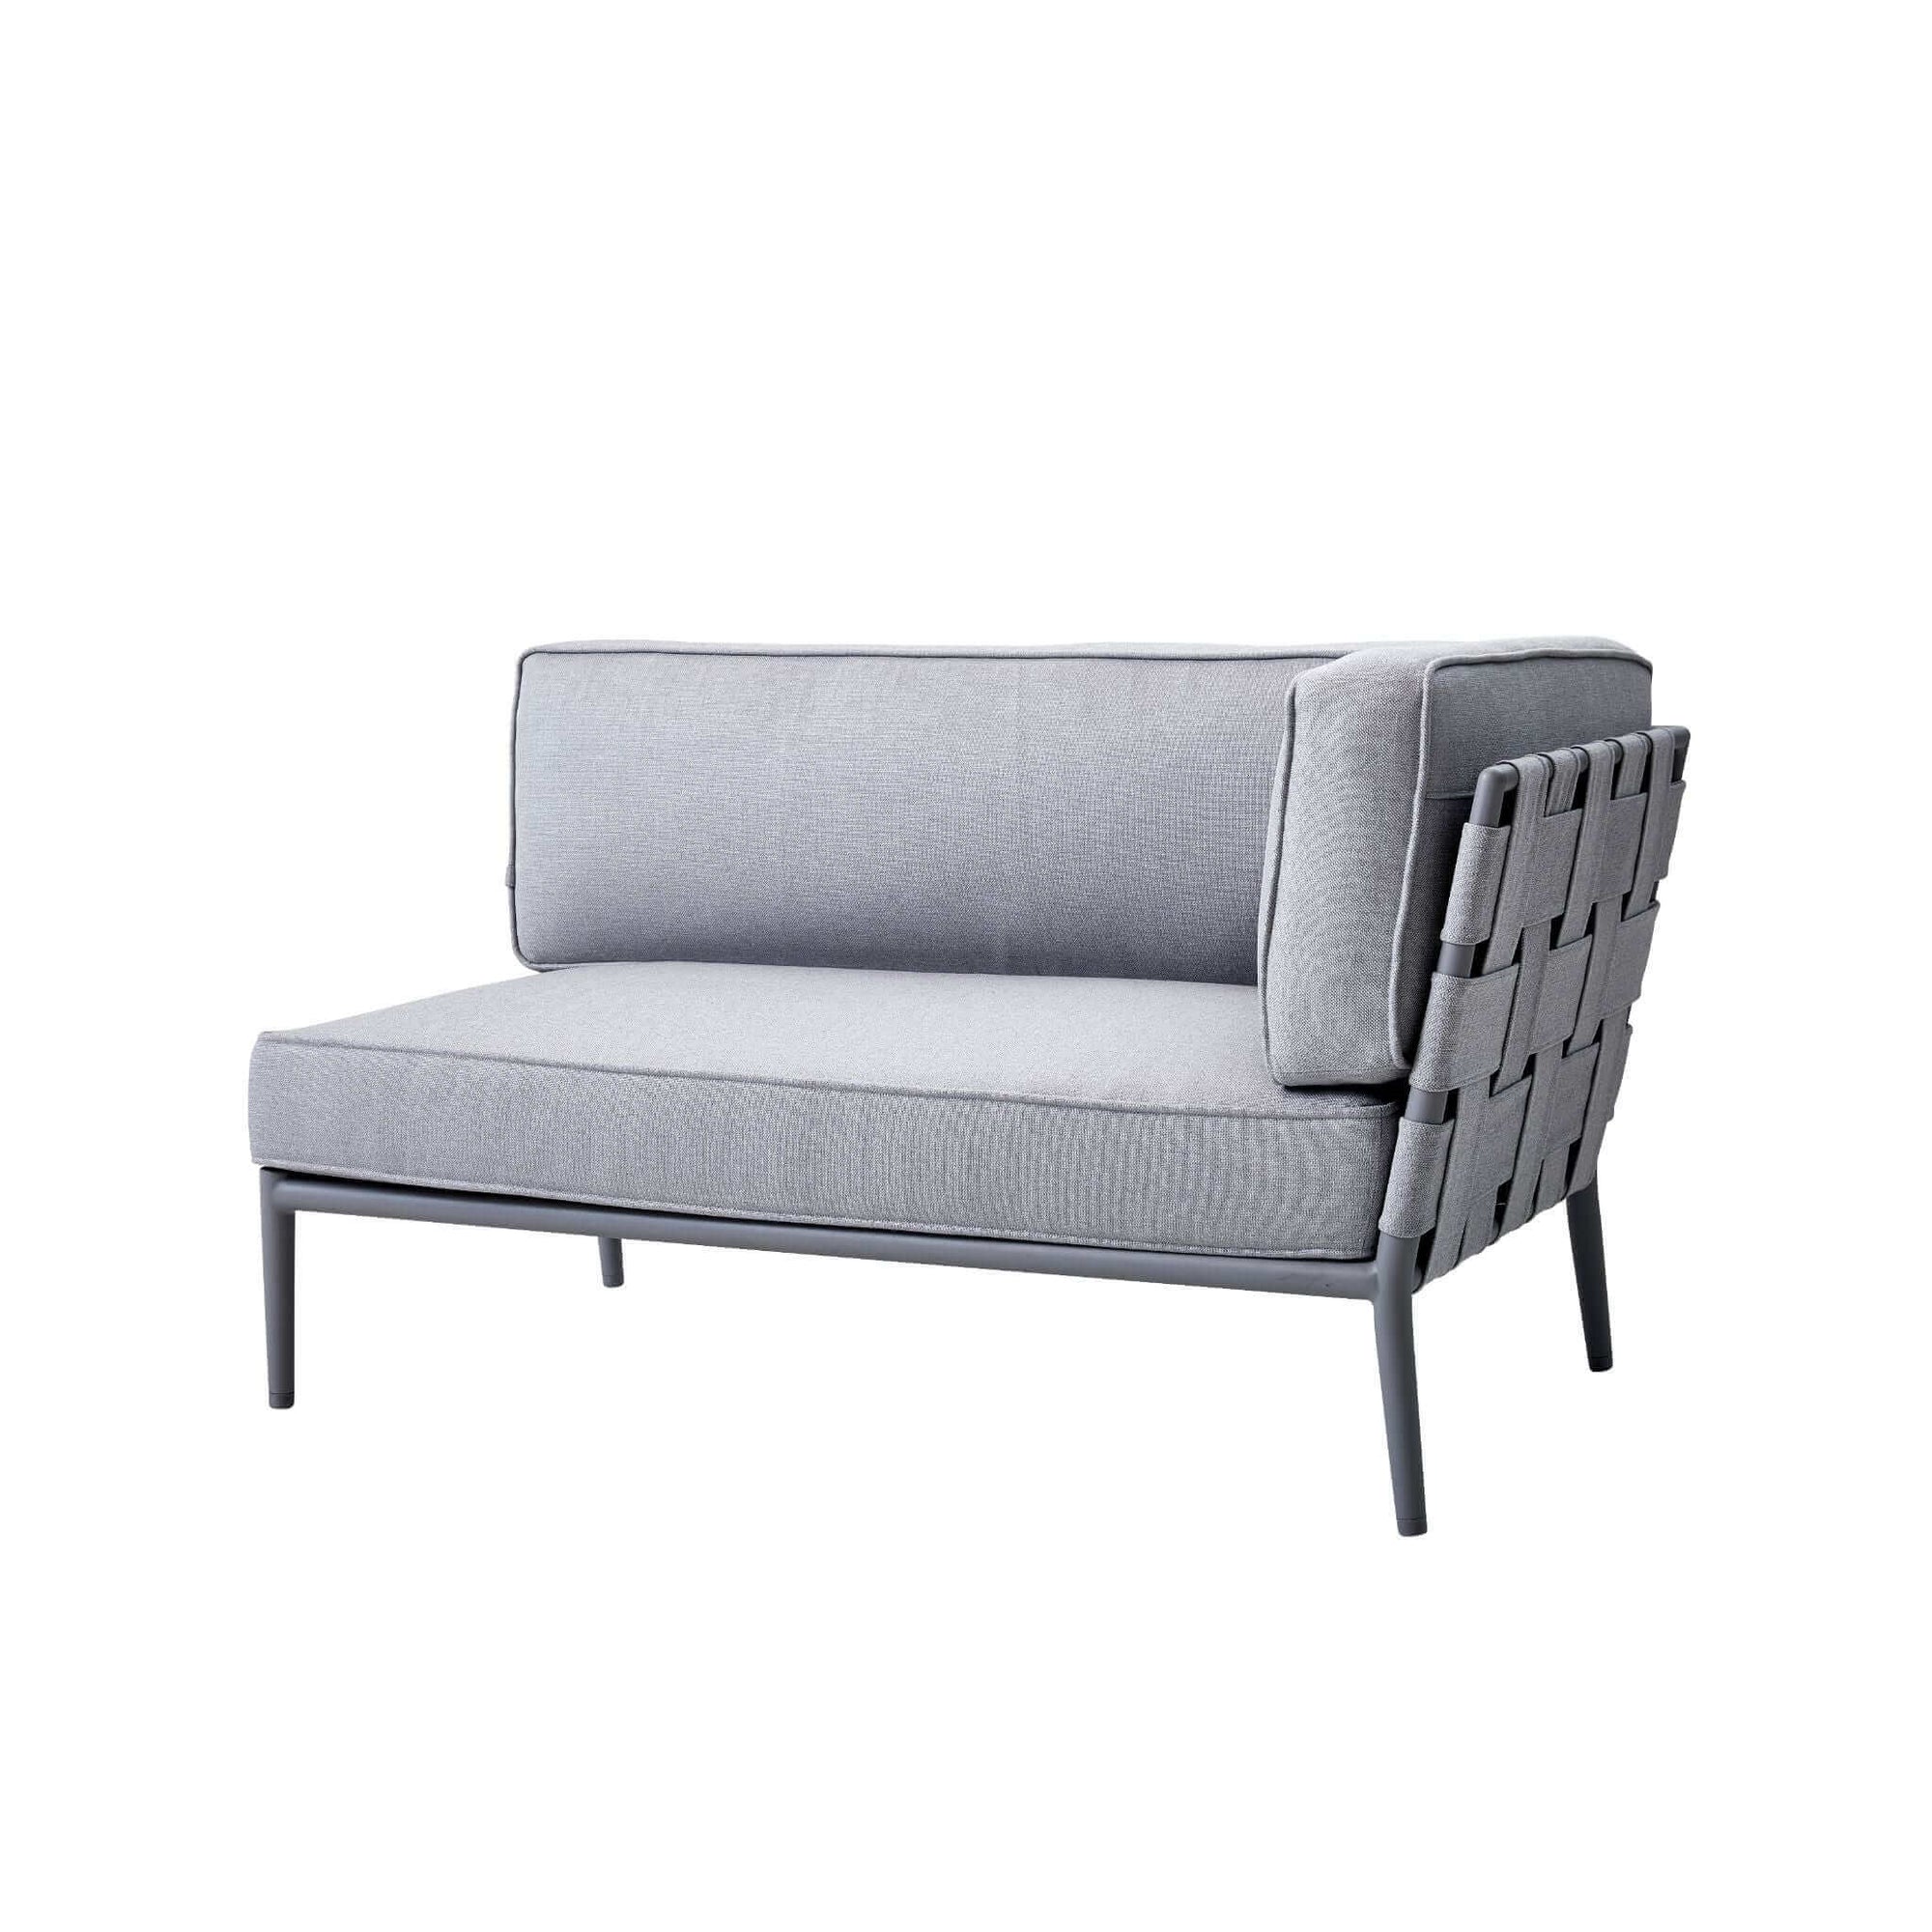 Cane-Line Conic 2-Seater Sofa Left Module-Grey, Cane-line AirTouch frame